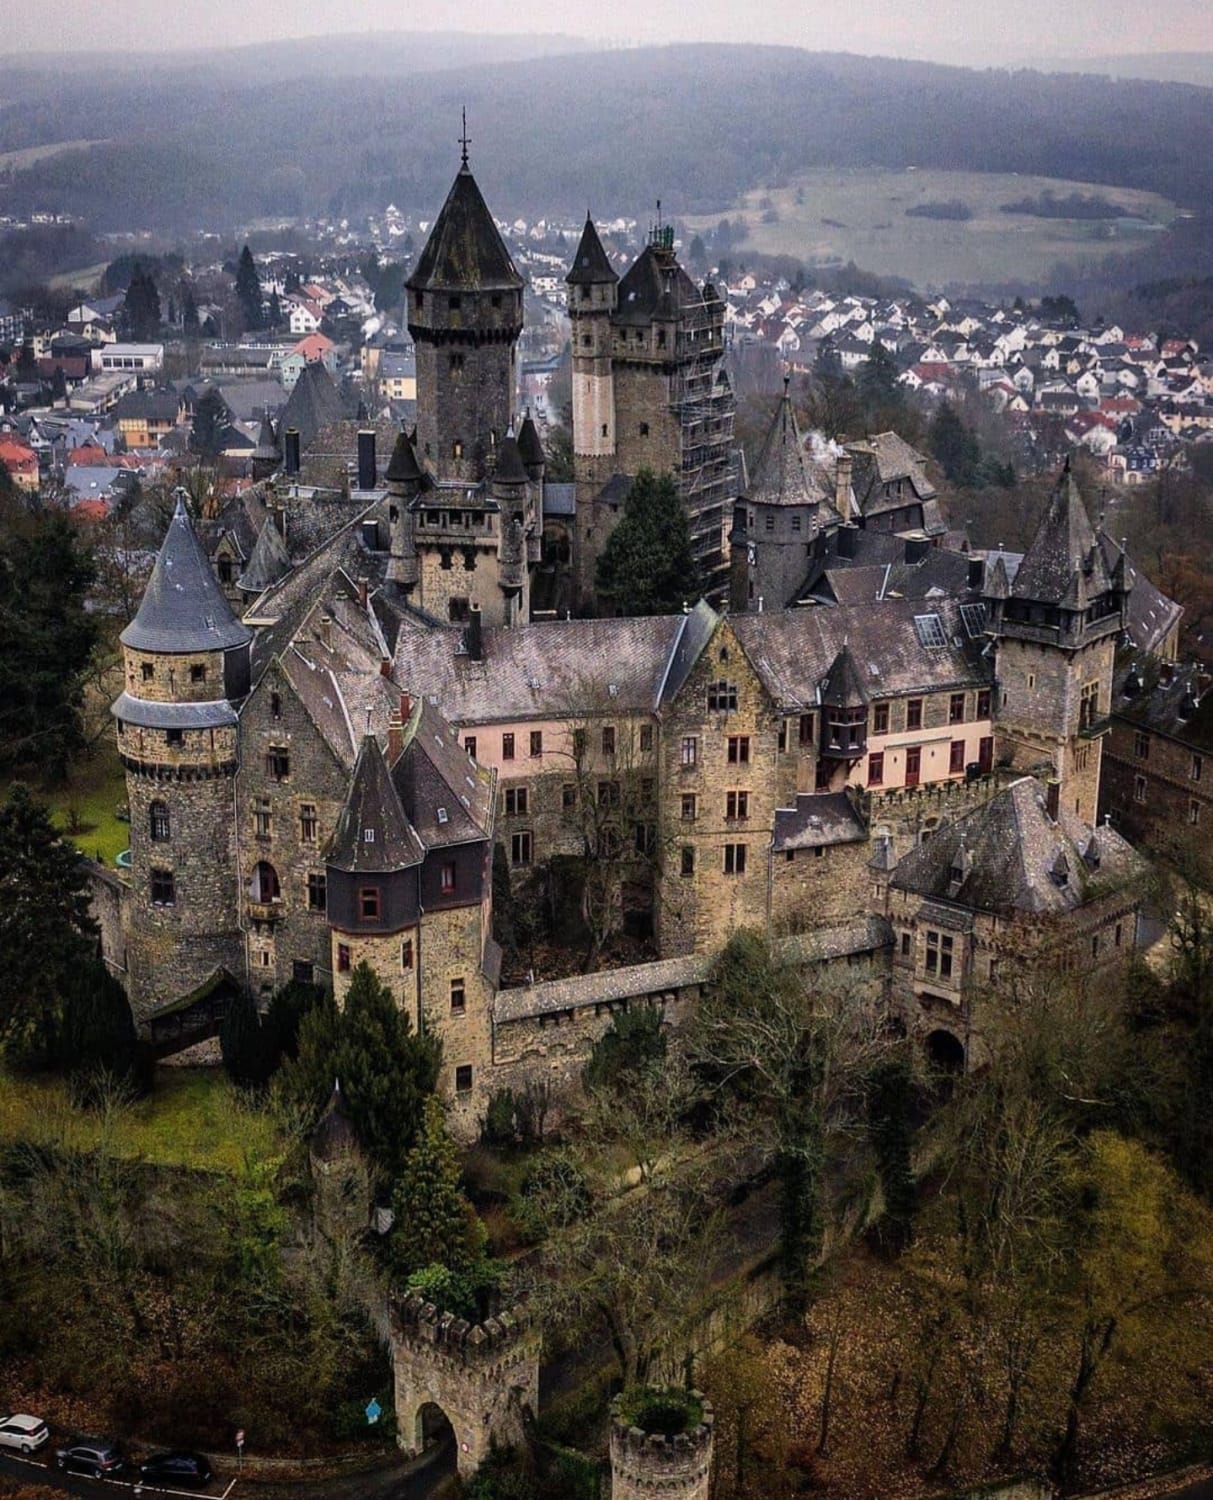 Braunfels, Germany, the bad guy's castle